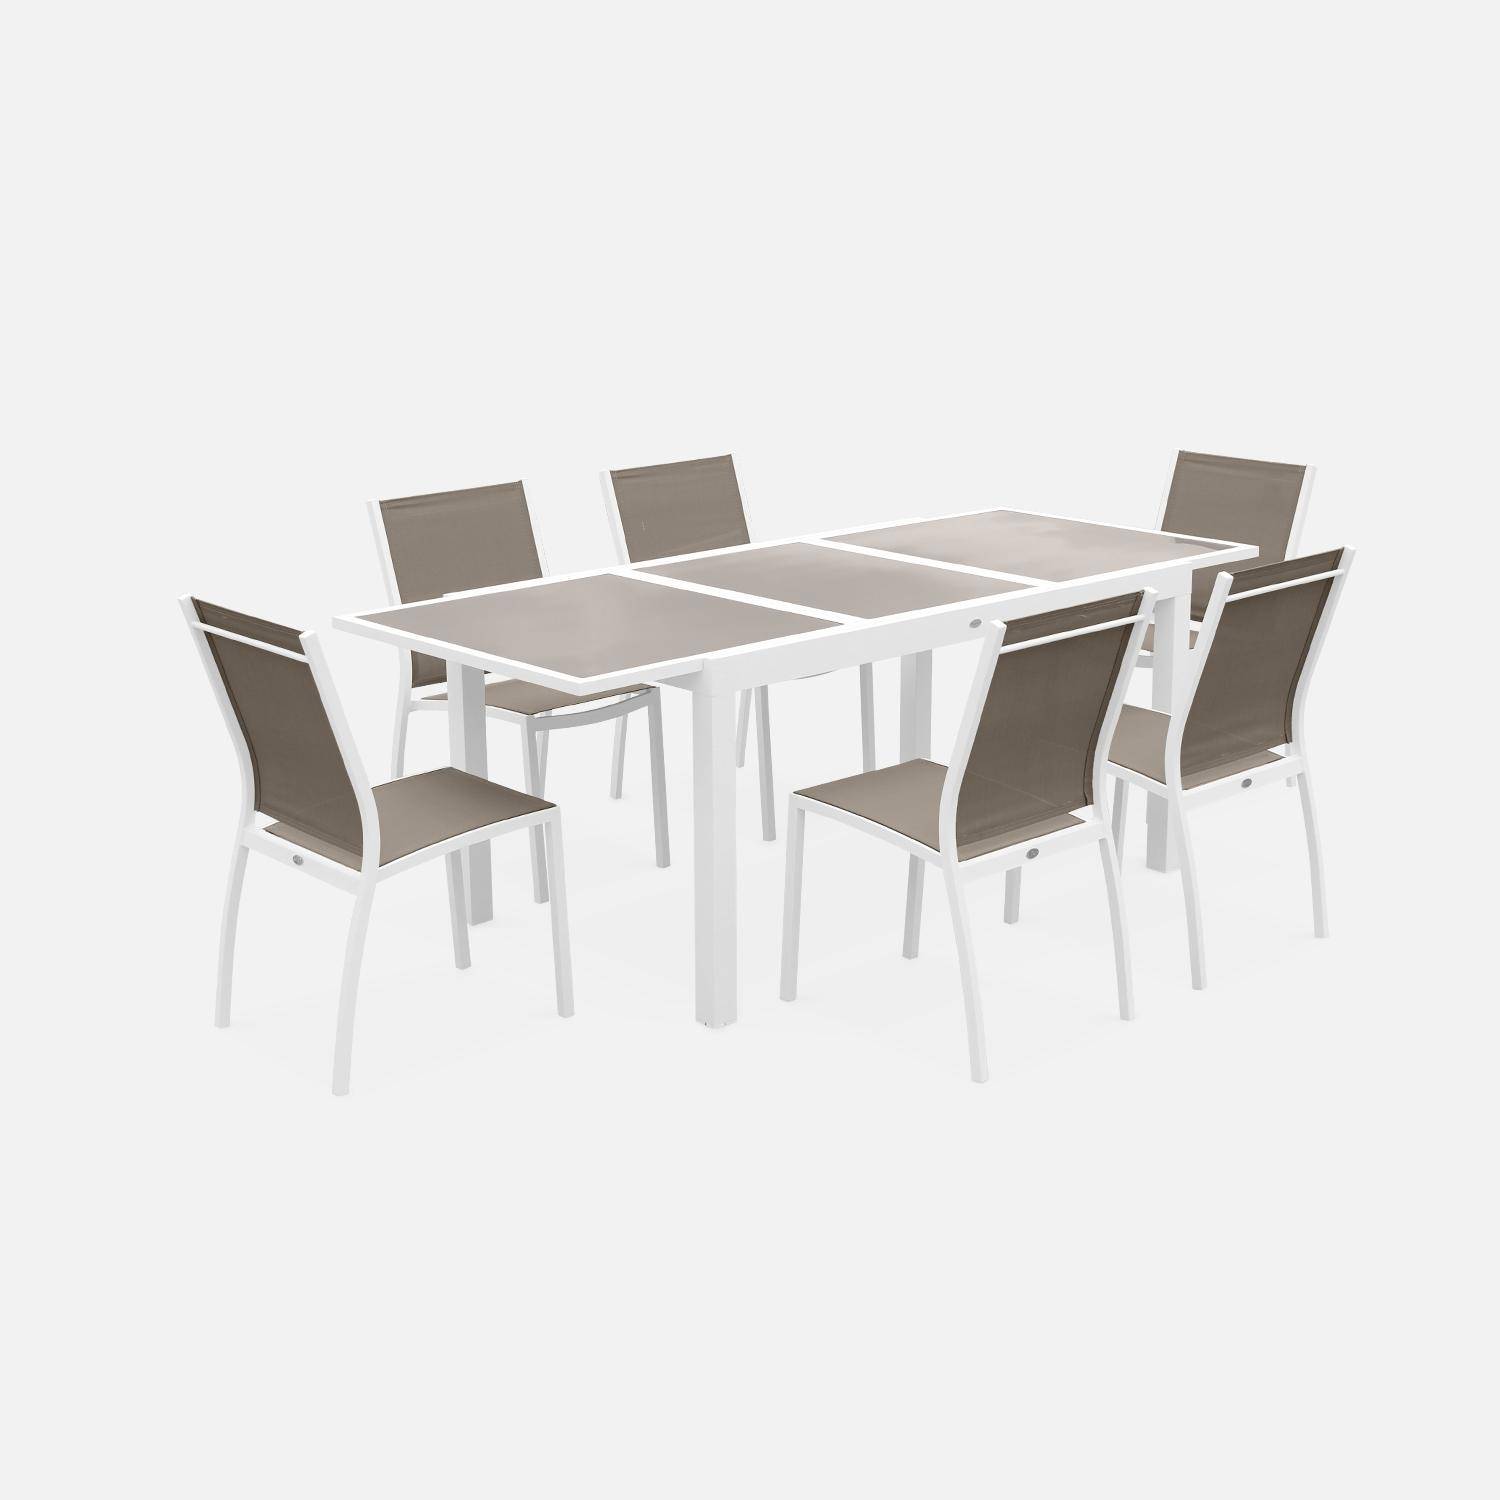 6-seater garden dining set, extendable 150-210cm aluminium table and 6 chairs - Orlando - White frame, Beige-Brown textilene Photo2